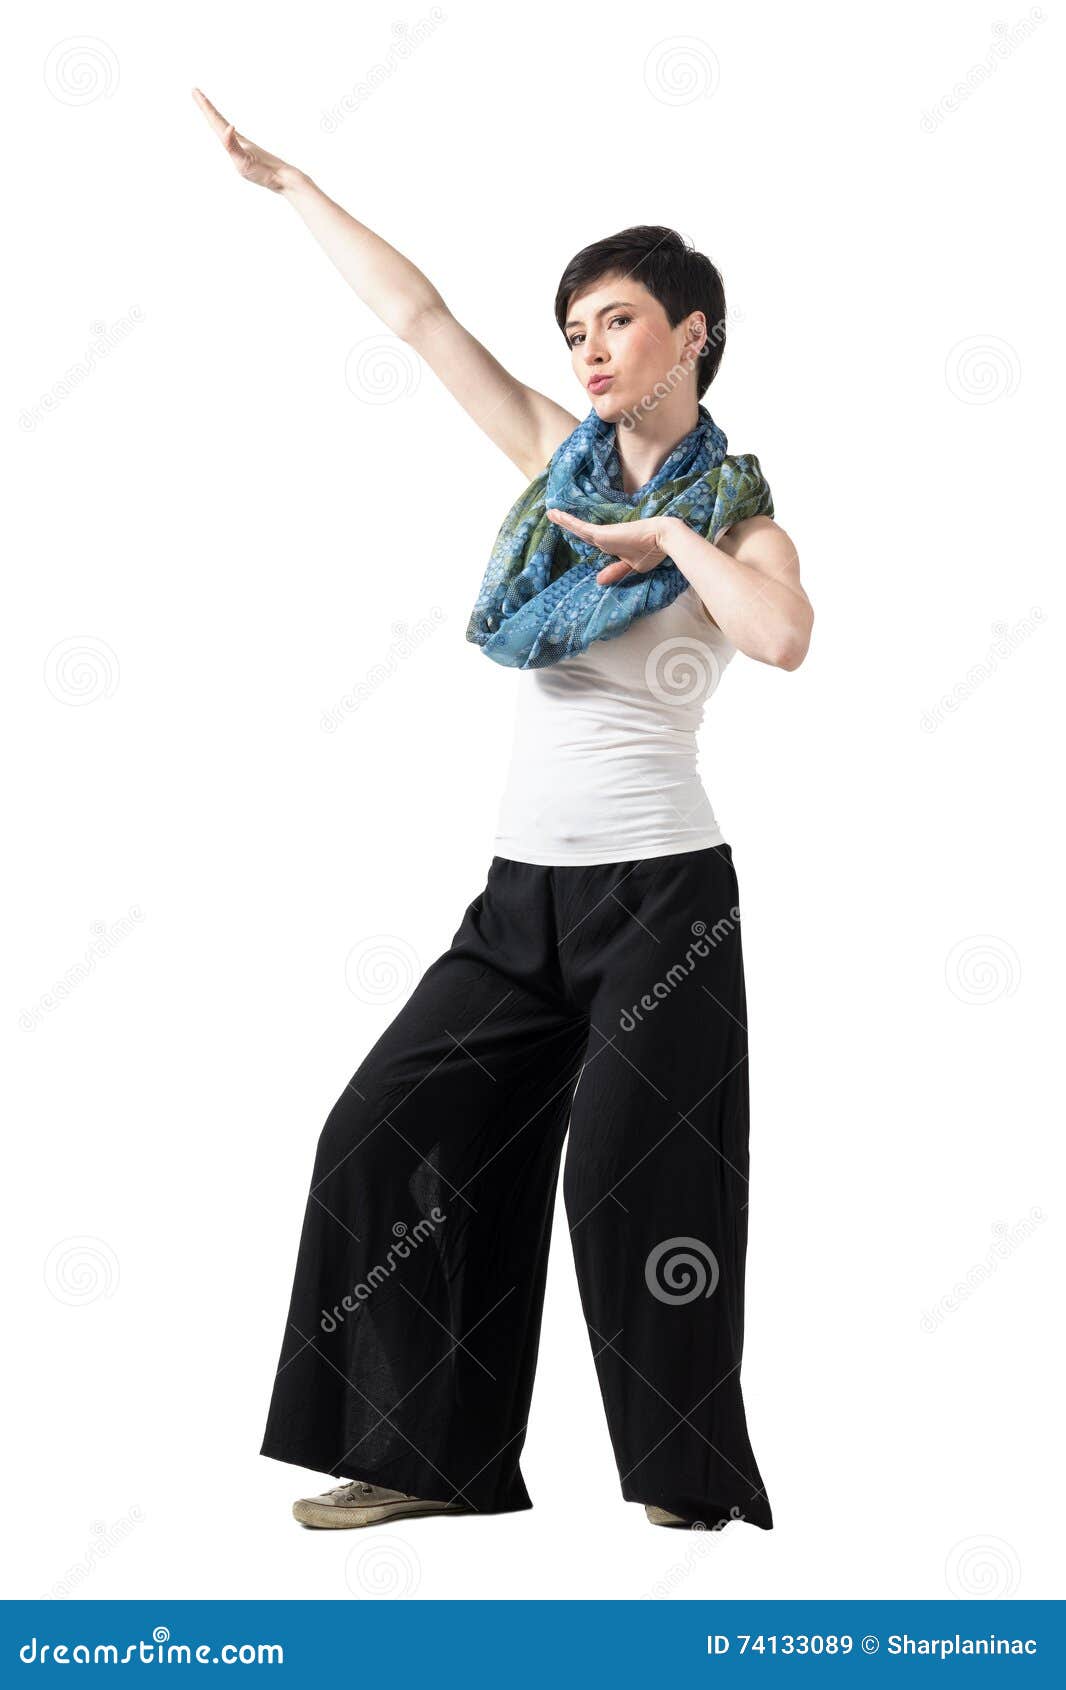 Kung-Fu Girl Stock Photo, Picture and Royalty Free Image. Image 50013116.